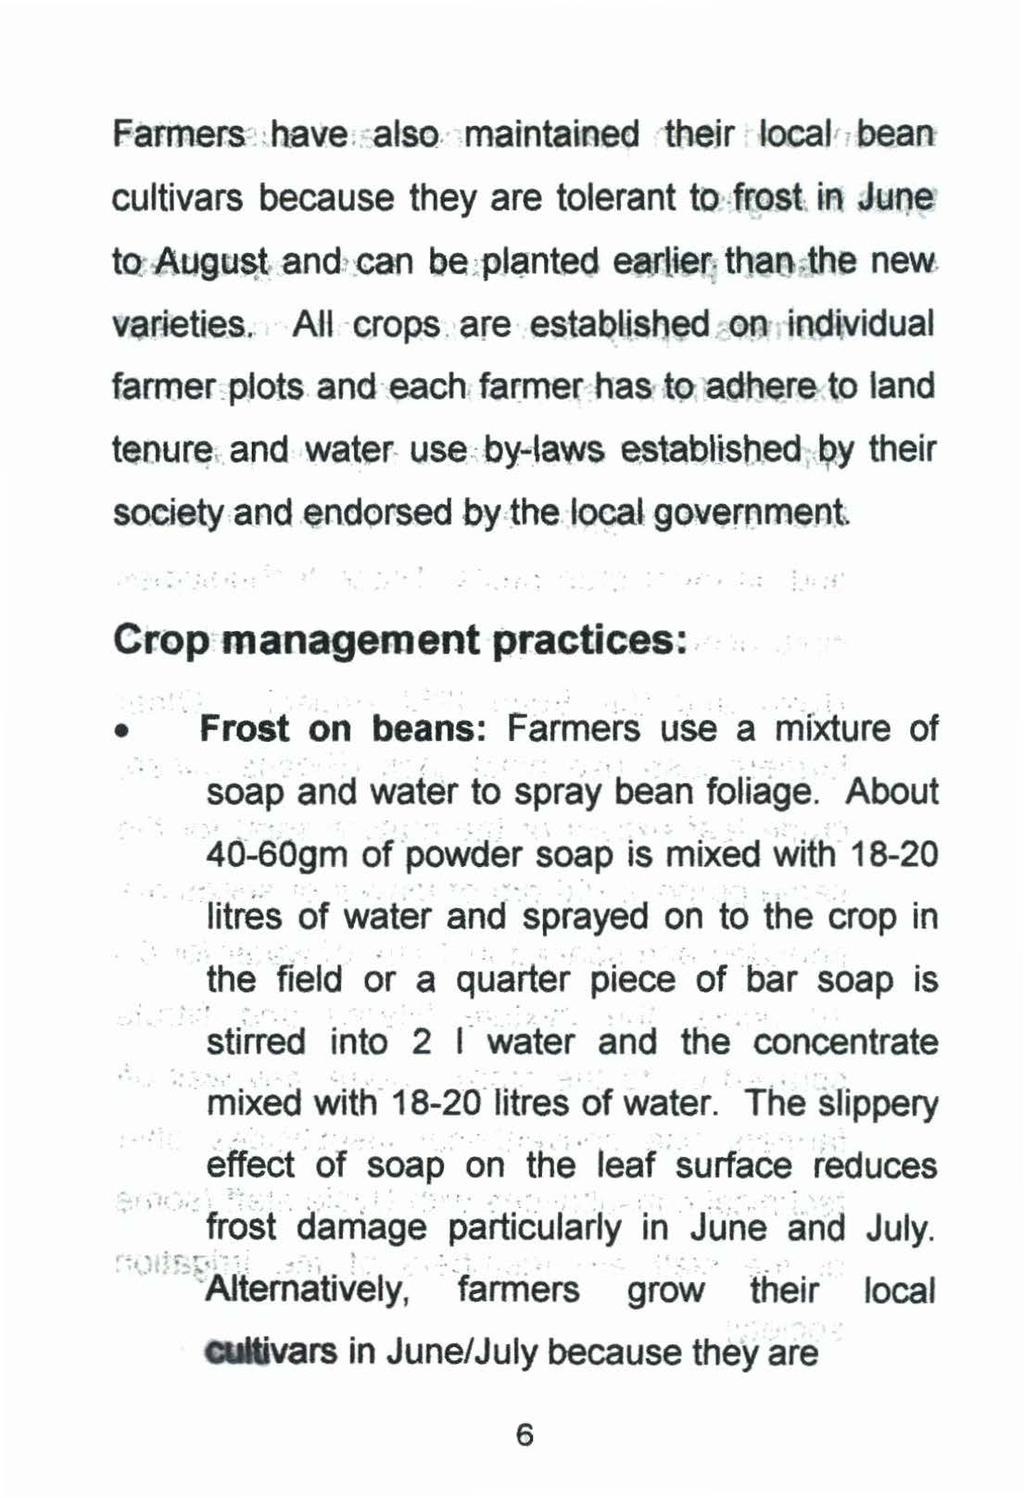 Farmers :nave. also. maintained their local bean cultivars beca use they are tolerant to.frost in June tq Augus.t and can be :pl~nted ea.rlier~ var-ieties. thao. the new. All crops.